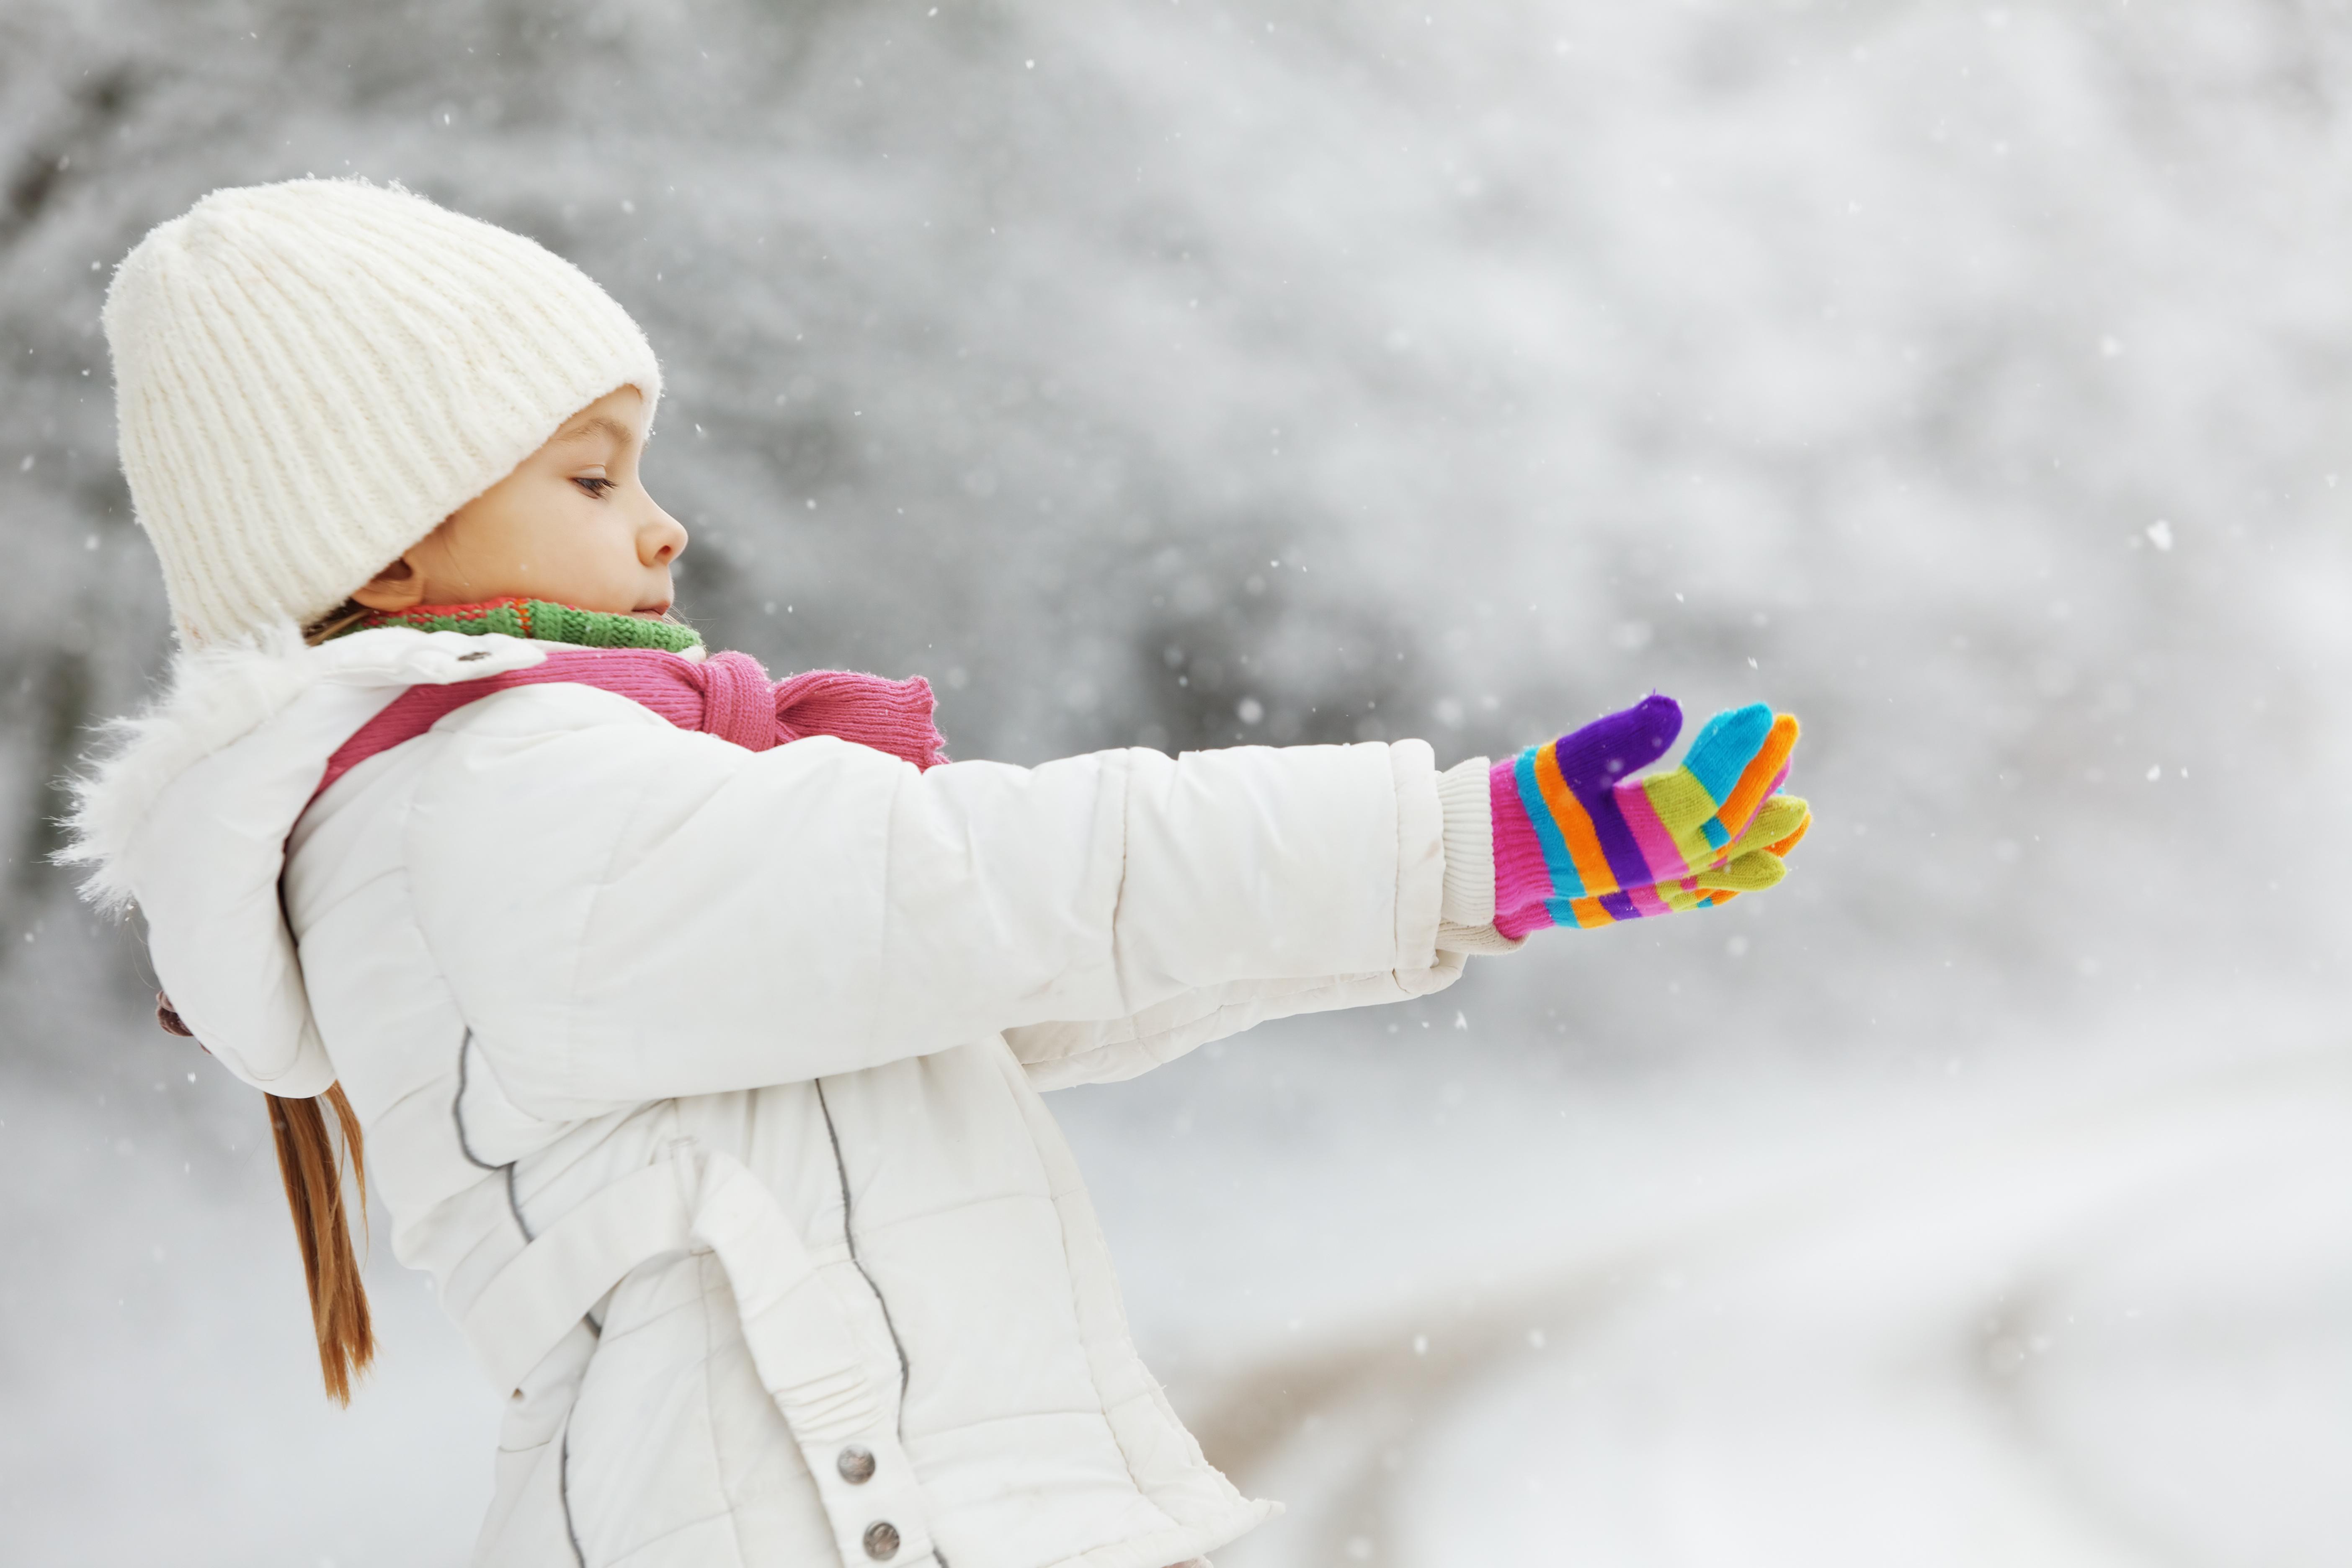 Snowy, snow, nature, winter, winter time, child wallpaper